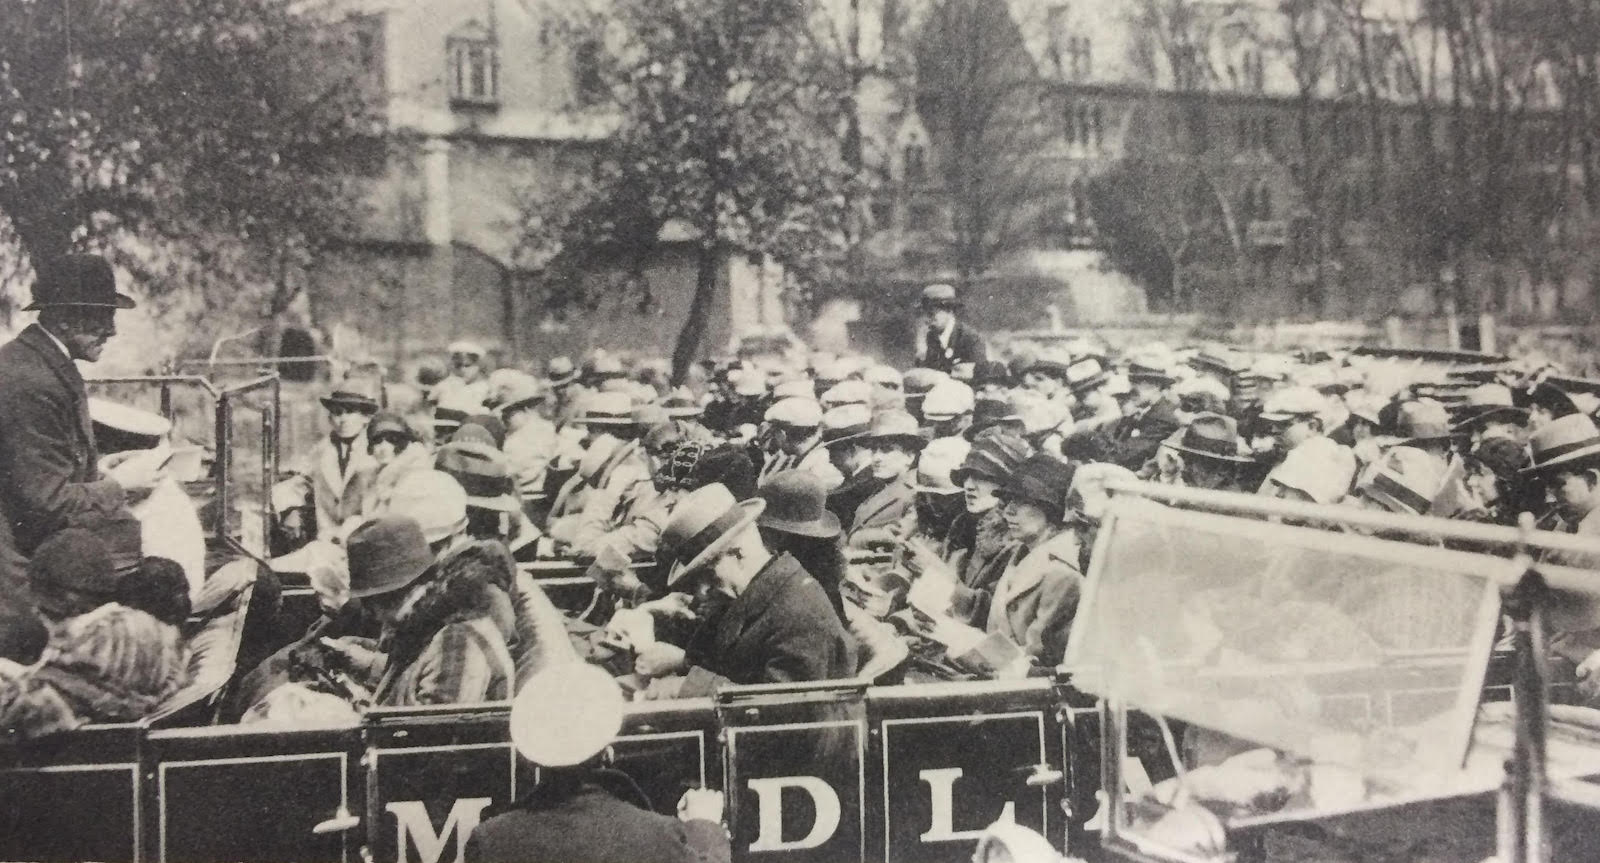 Students of the Floating University leaving Oxford, 1926, from Walter Harris, Photographs of the First University World Cruise (1927). Courtesy of the author, Walter C. Harris, University Travel Association.